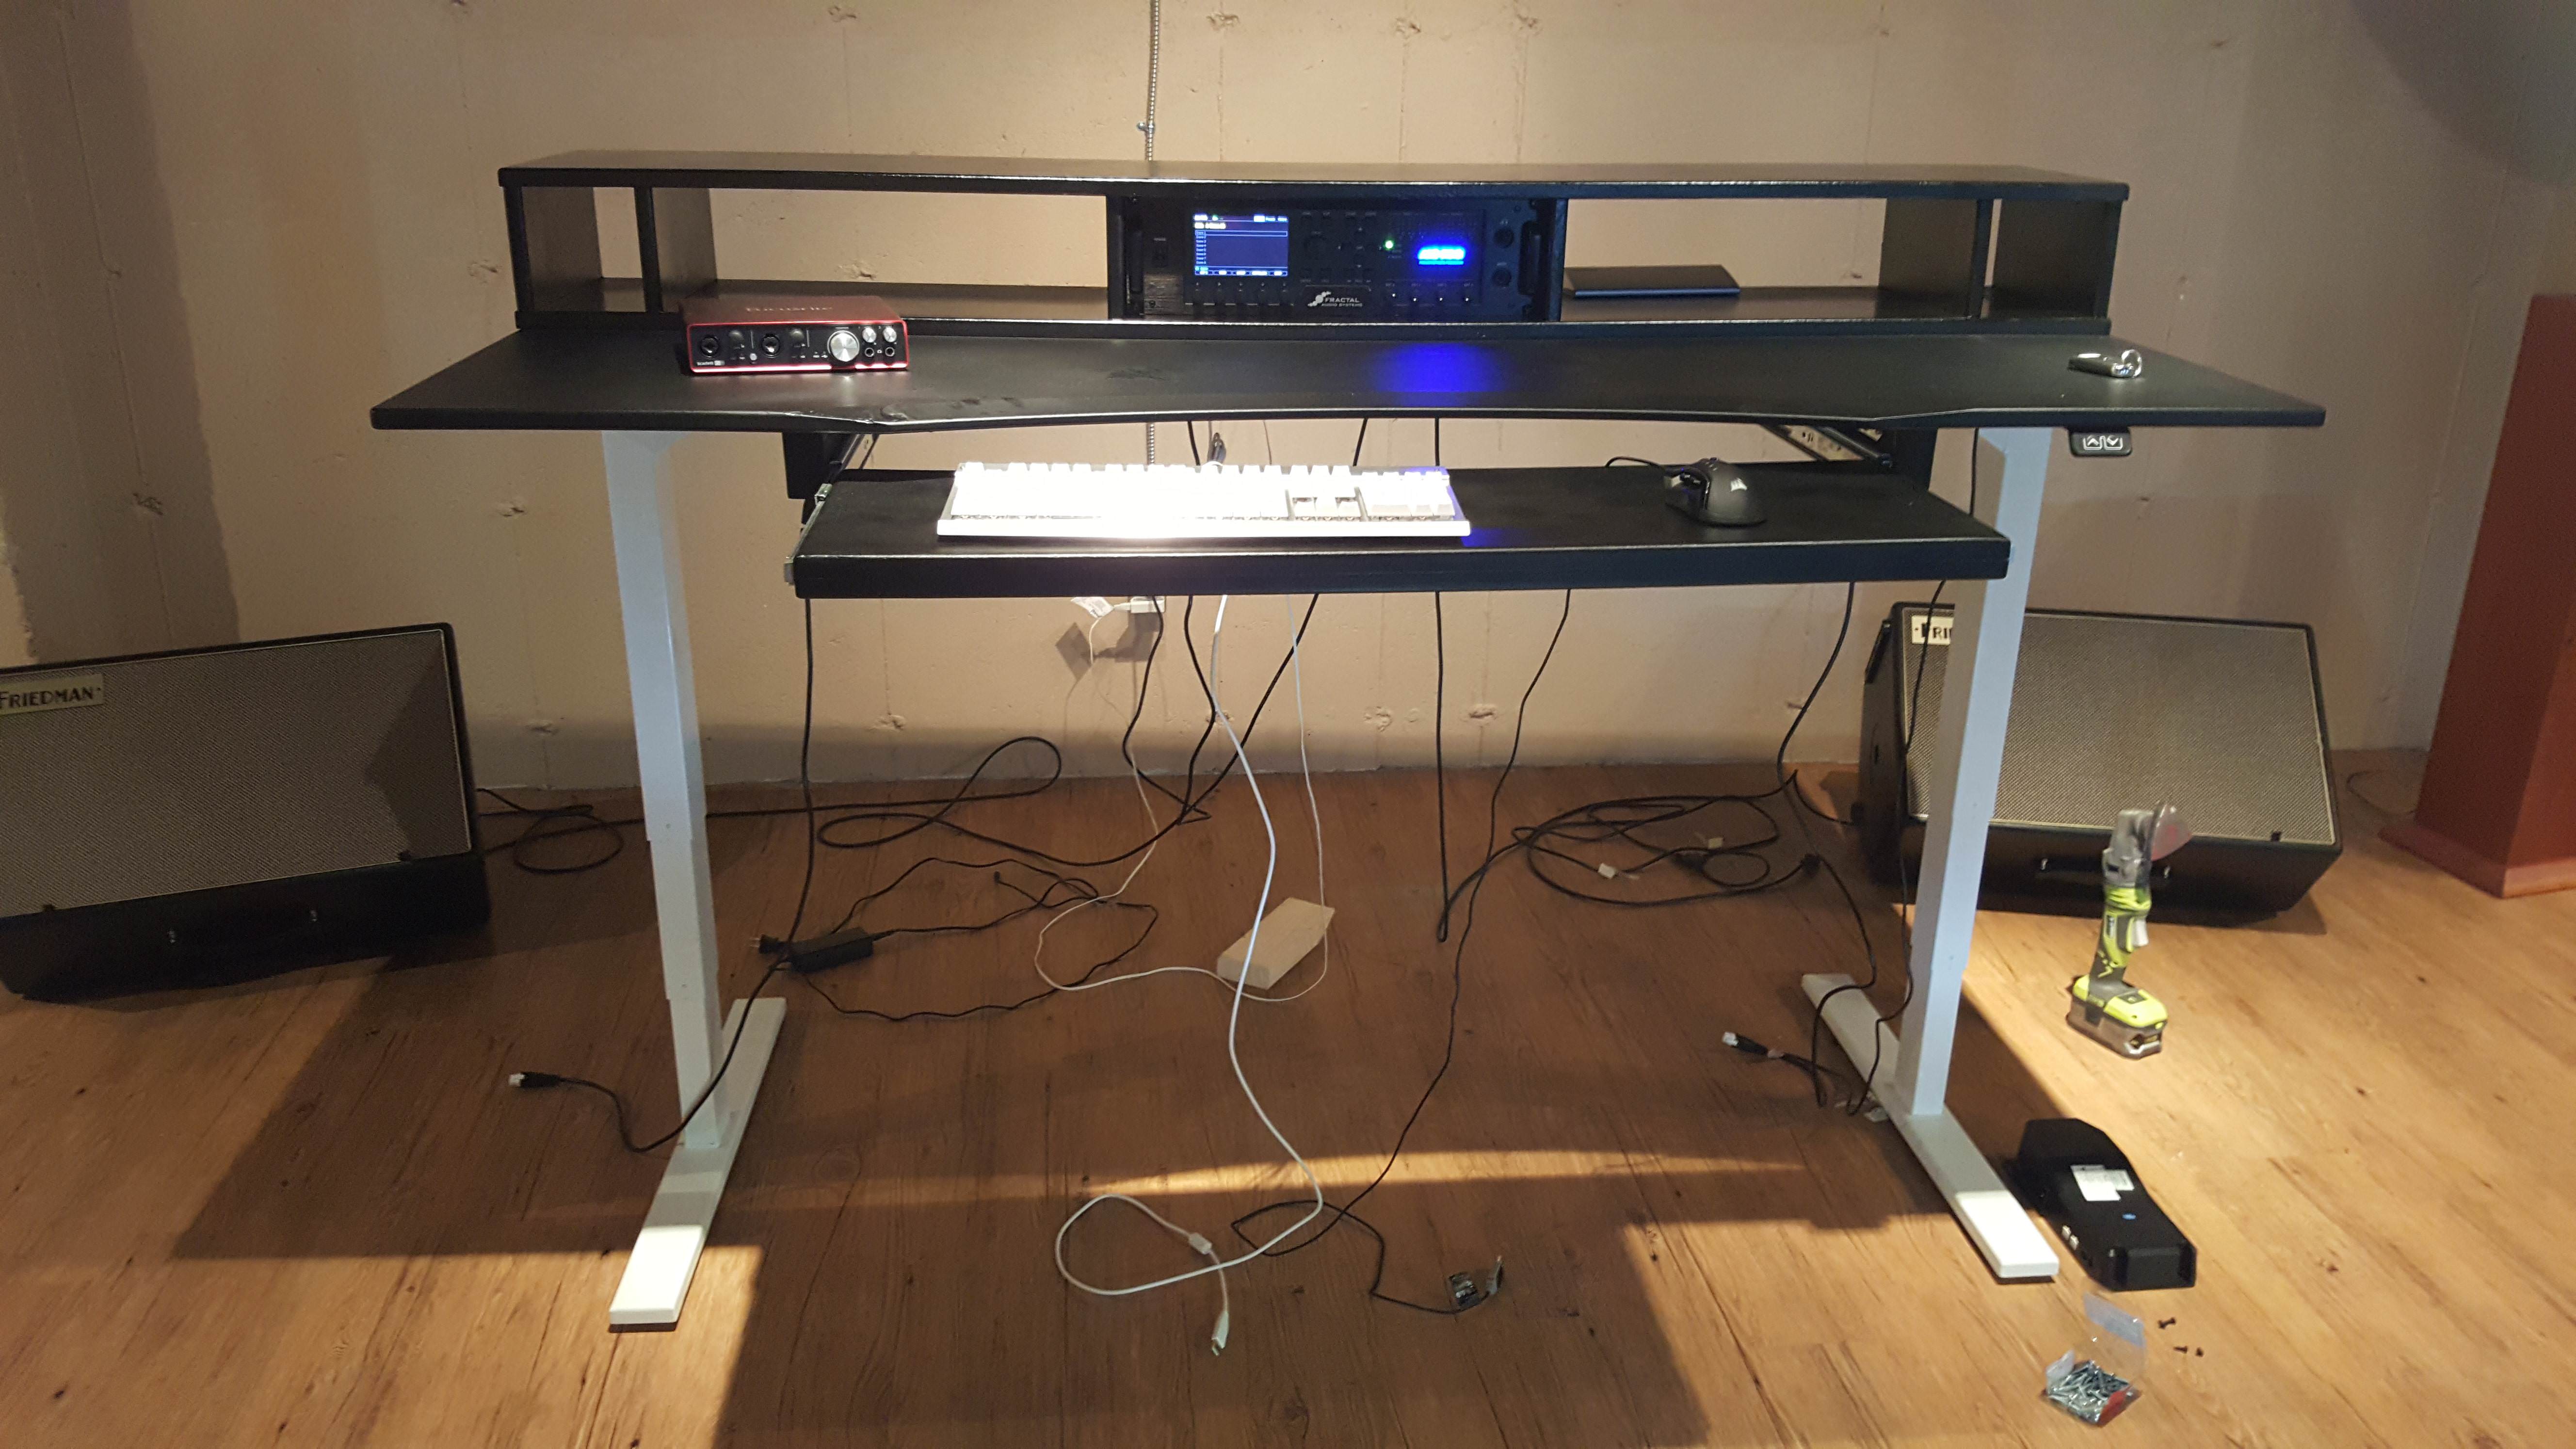 Axe Fx Iii And Shelf Help For Studio Desk Fractal Audio Systems